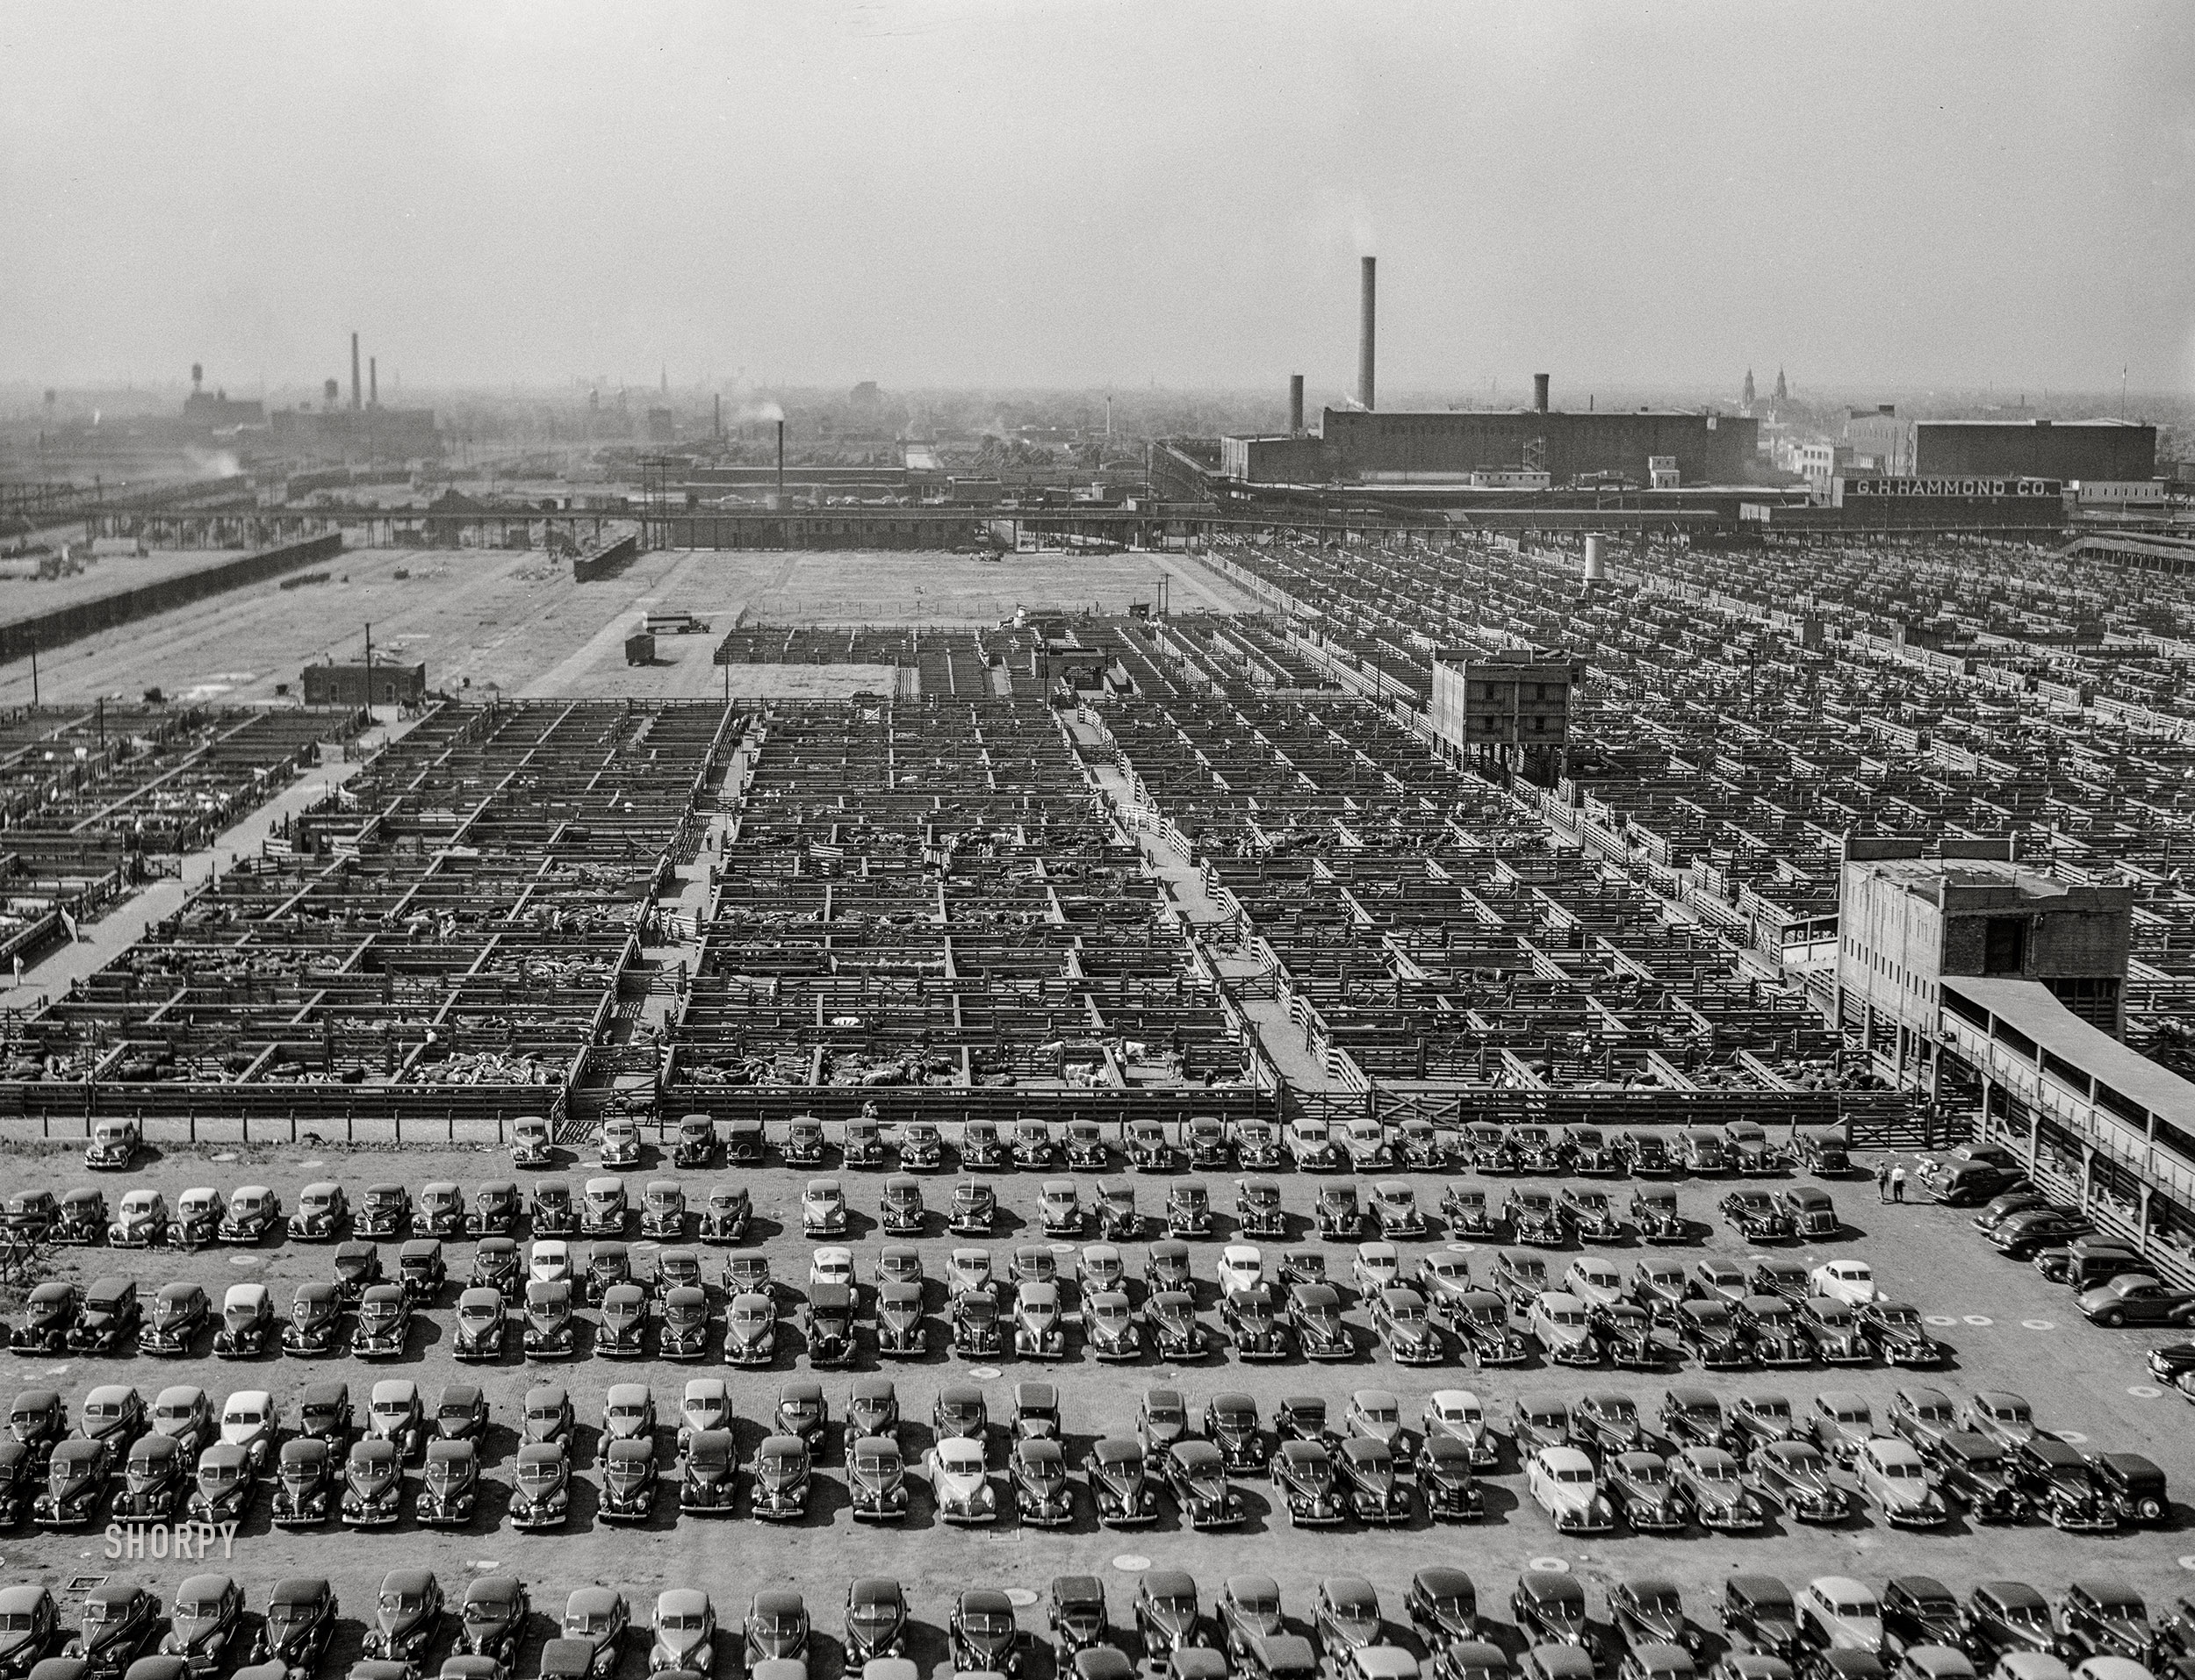 July 1941. "Union Stockyards, Chicago. Employees' parking lot in the foreground." Medium format acetate negative by John Vachon for the Farm Security Administration. View full size.